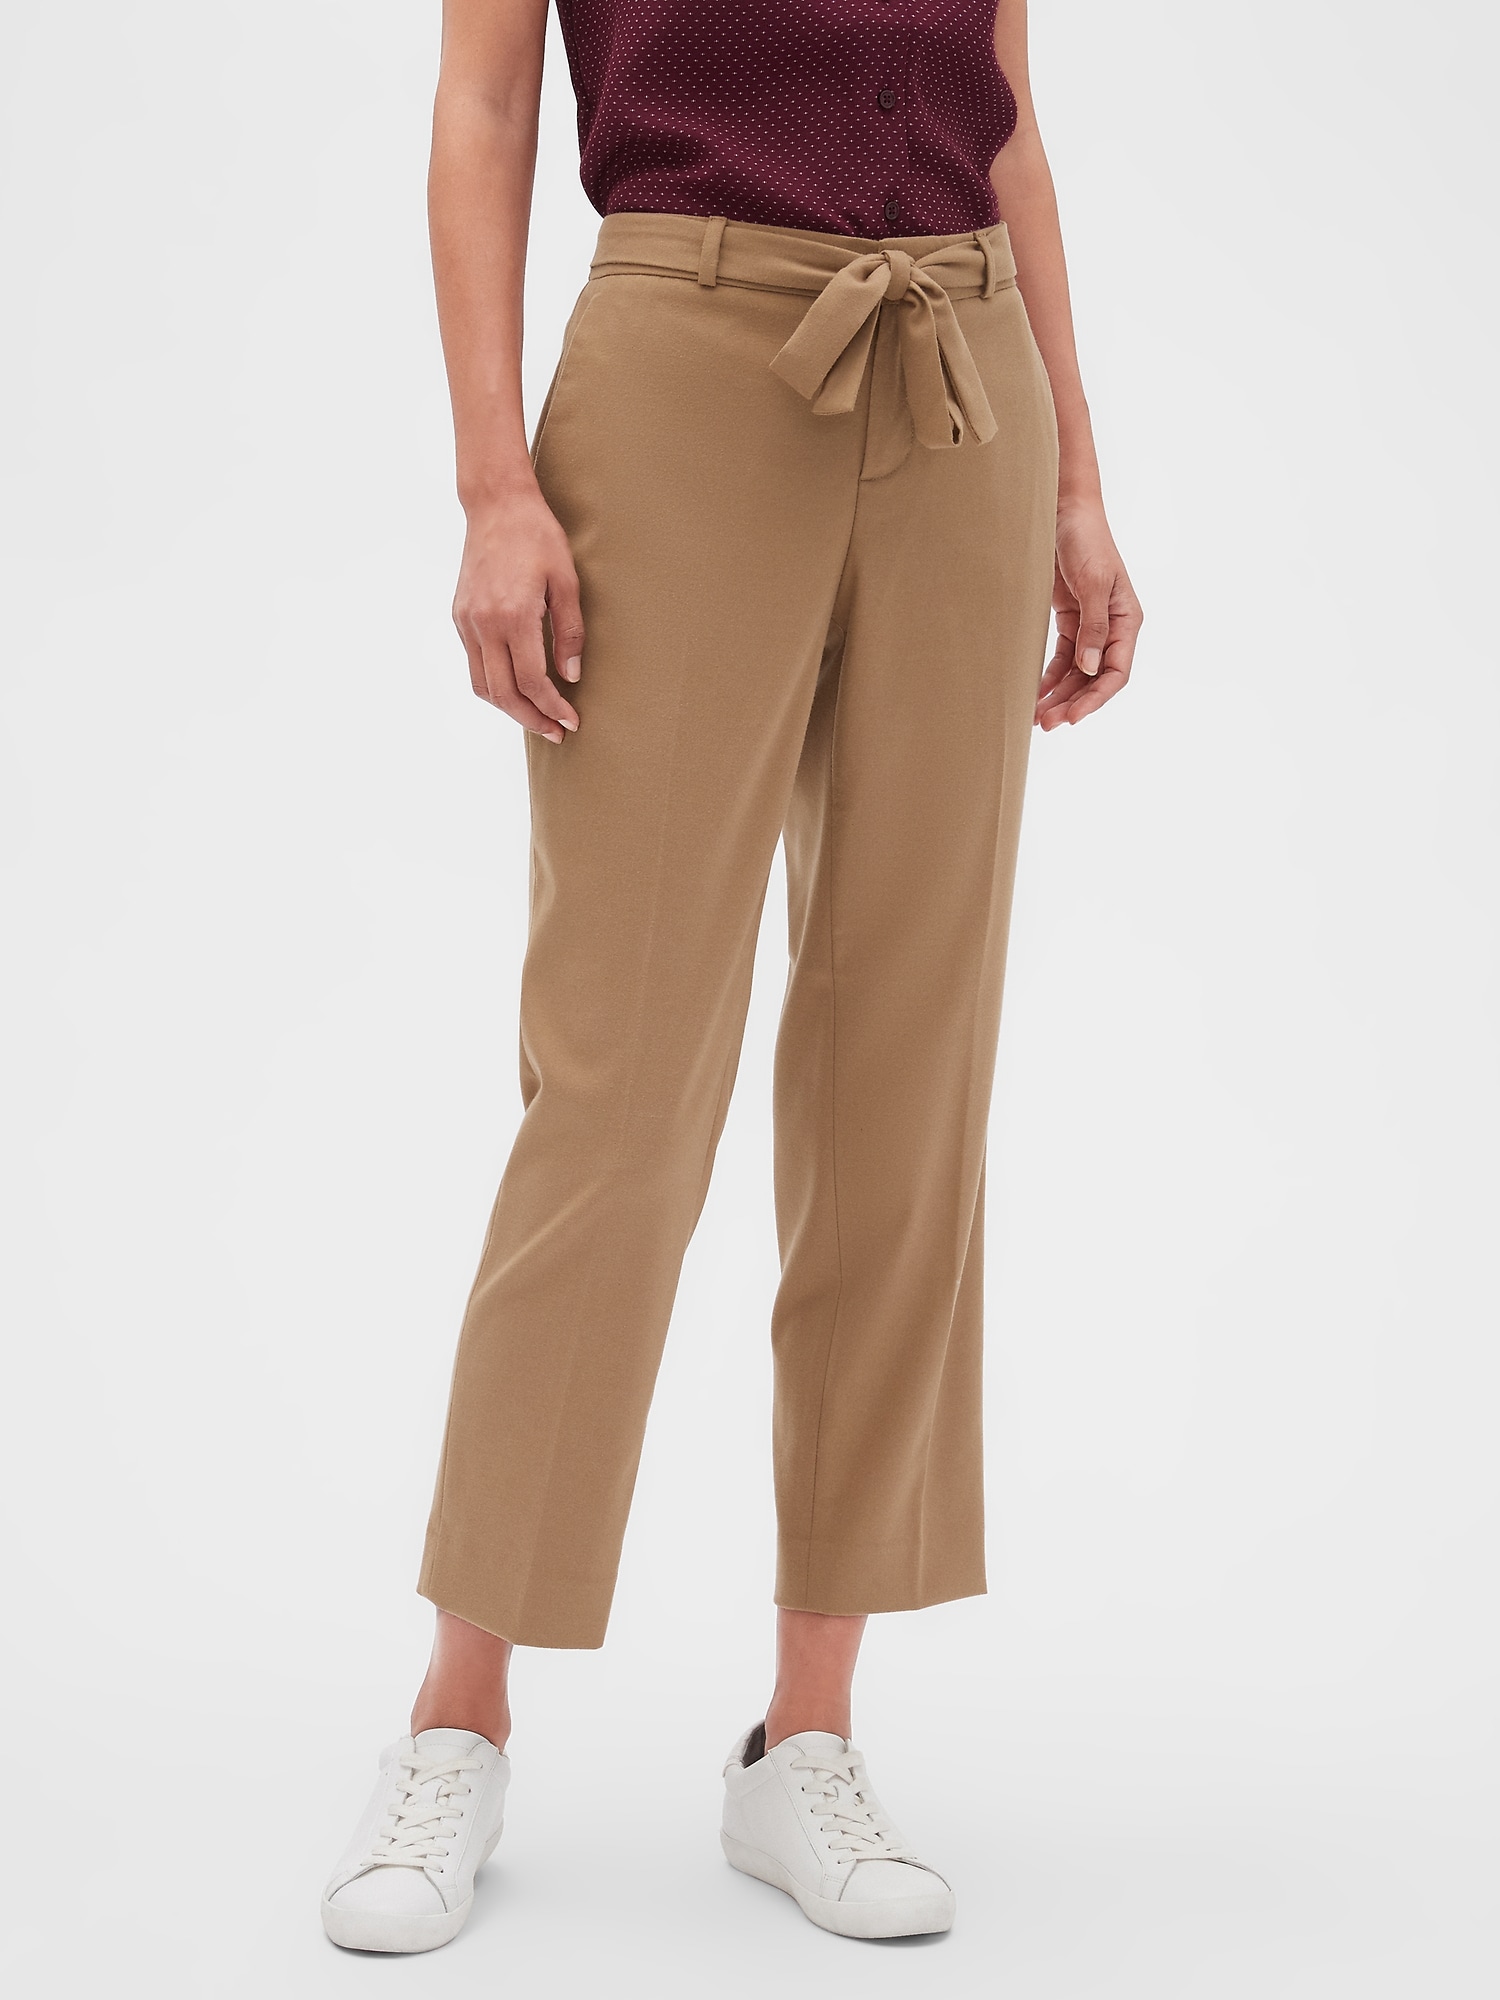 Banana Republic New Beige Avery Ankle-Fit Side Tie Hem Pants Womens Sz 6  Petite - $35 New With Tags - From weilu